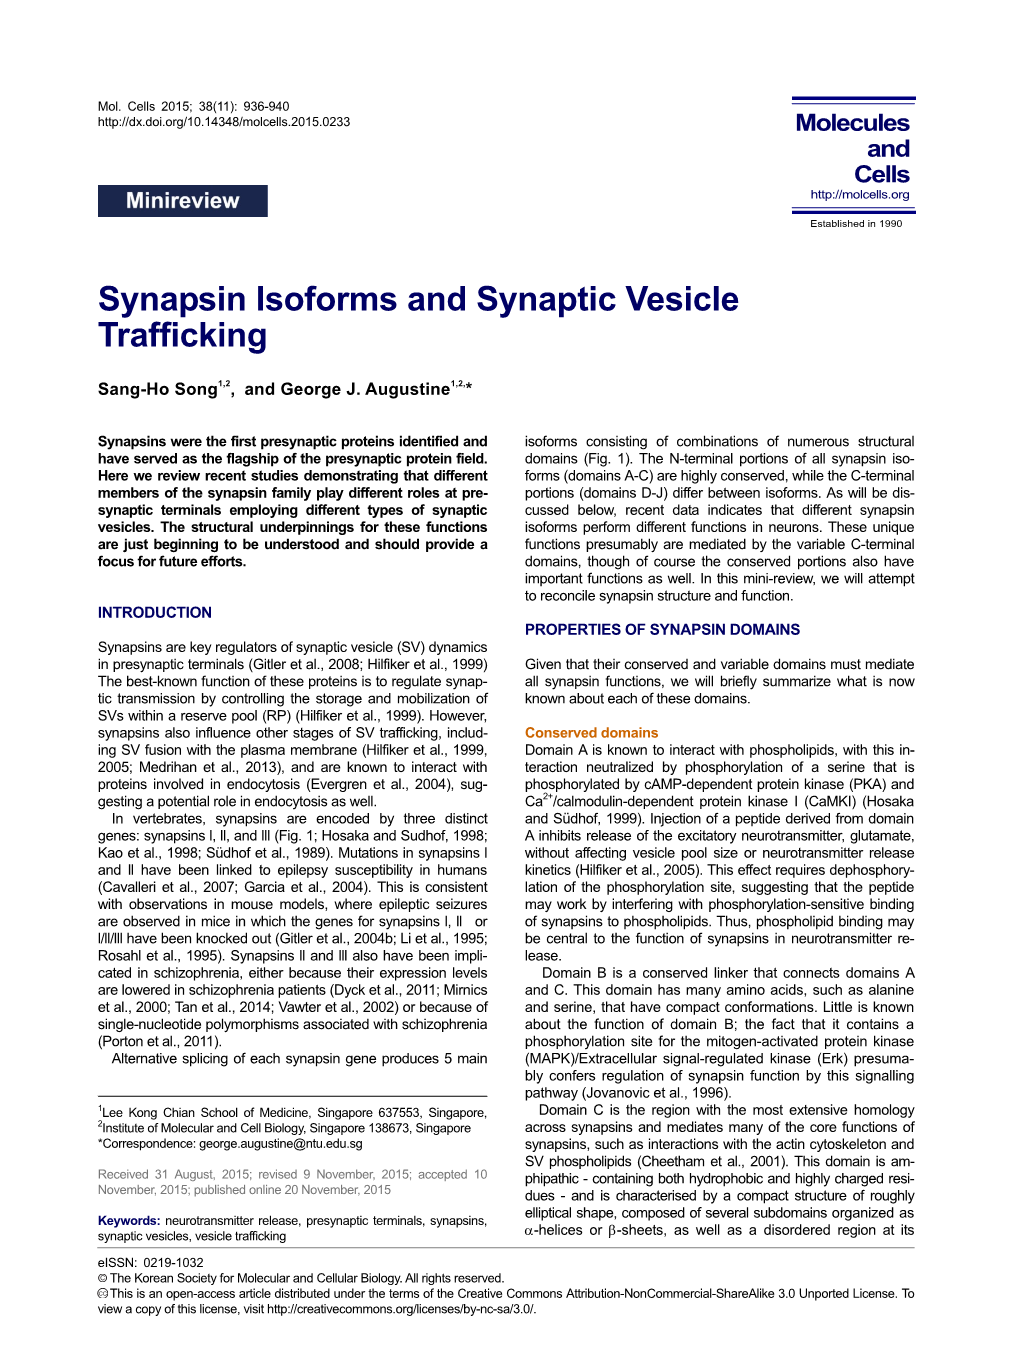 Synapsin Isoforms and Synaptic Vesicle Trafficking